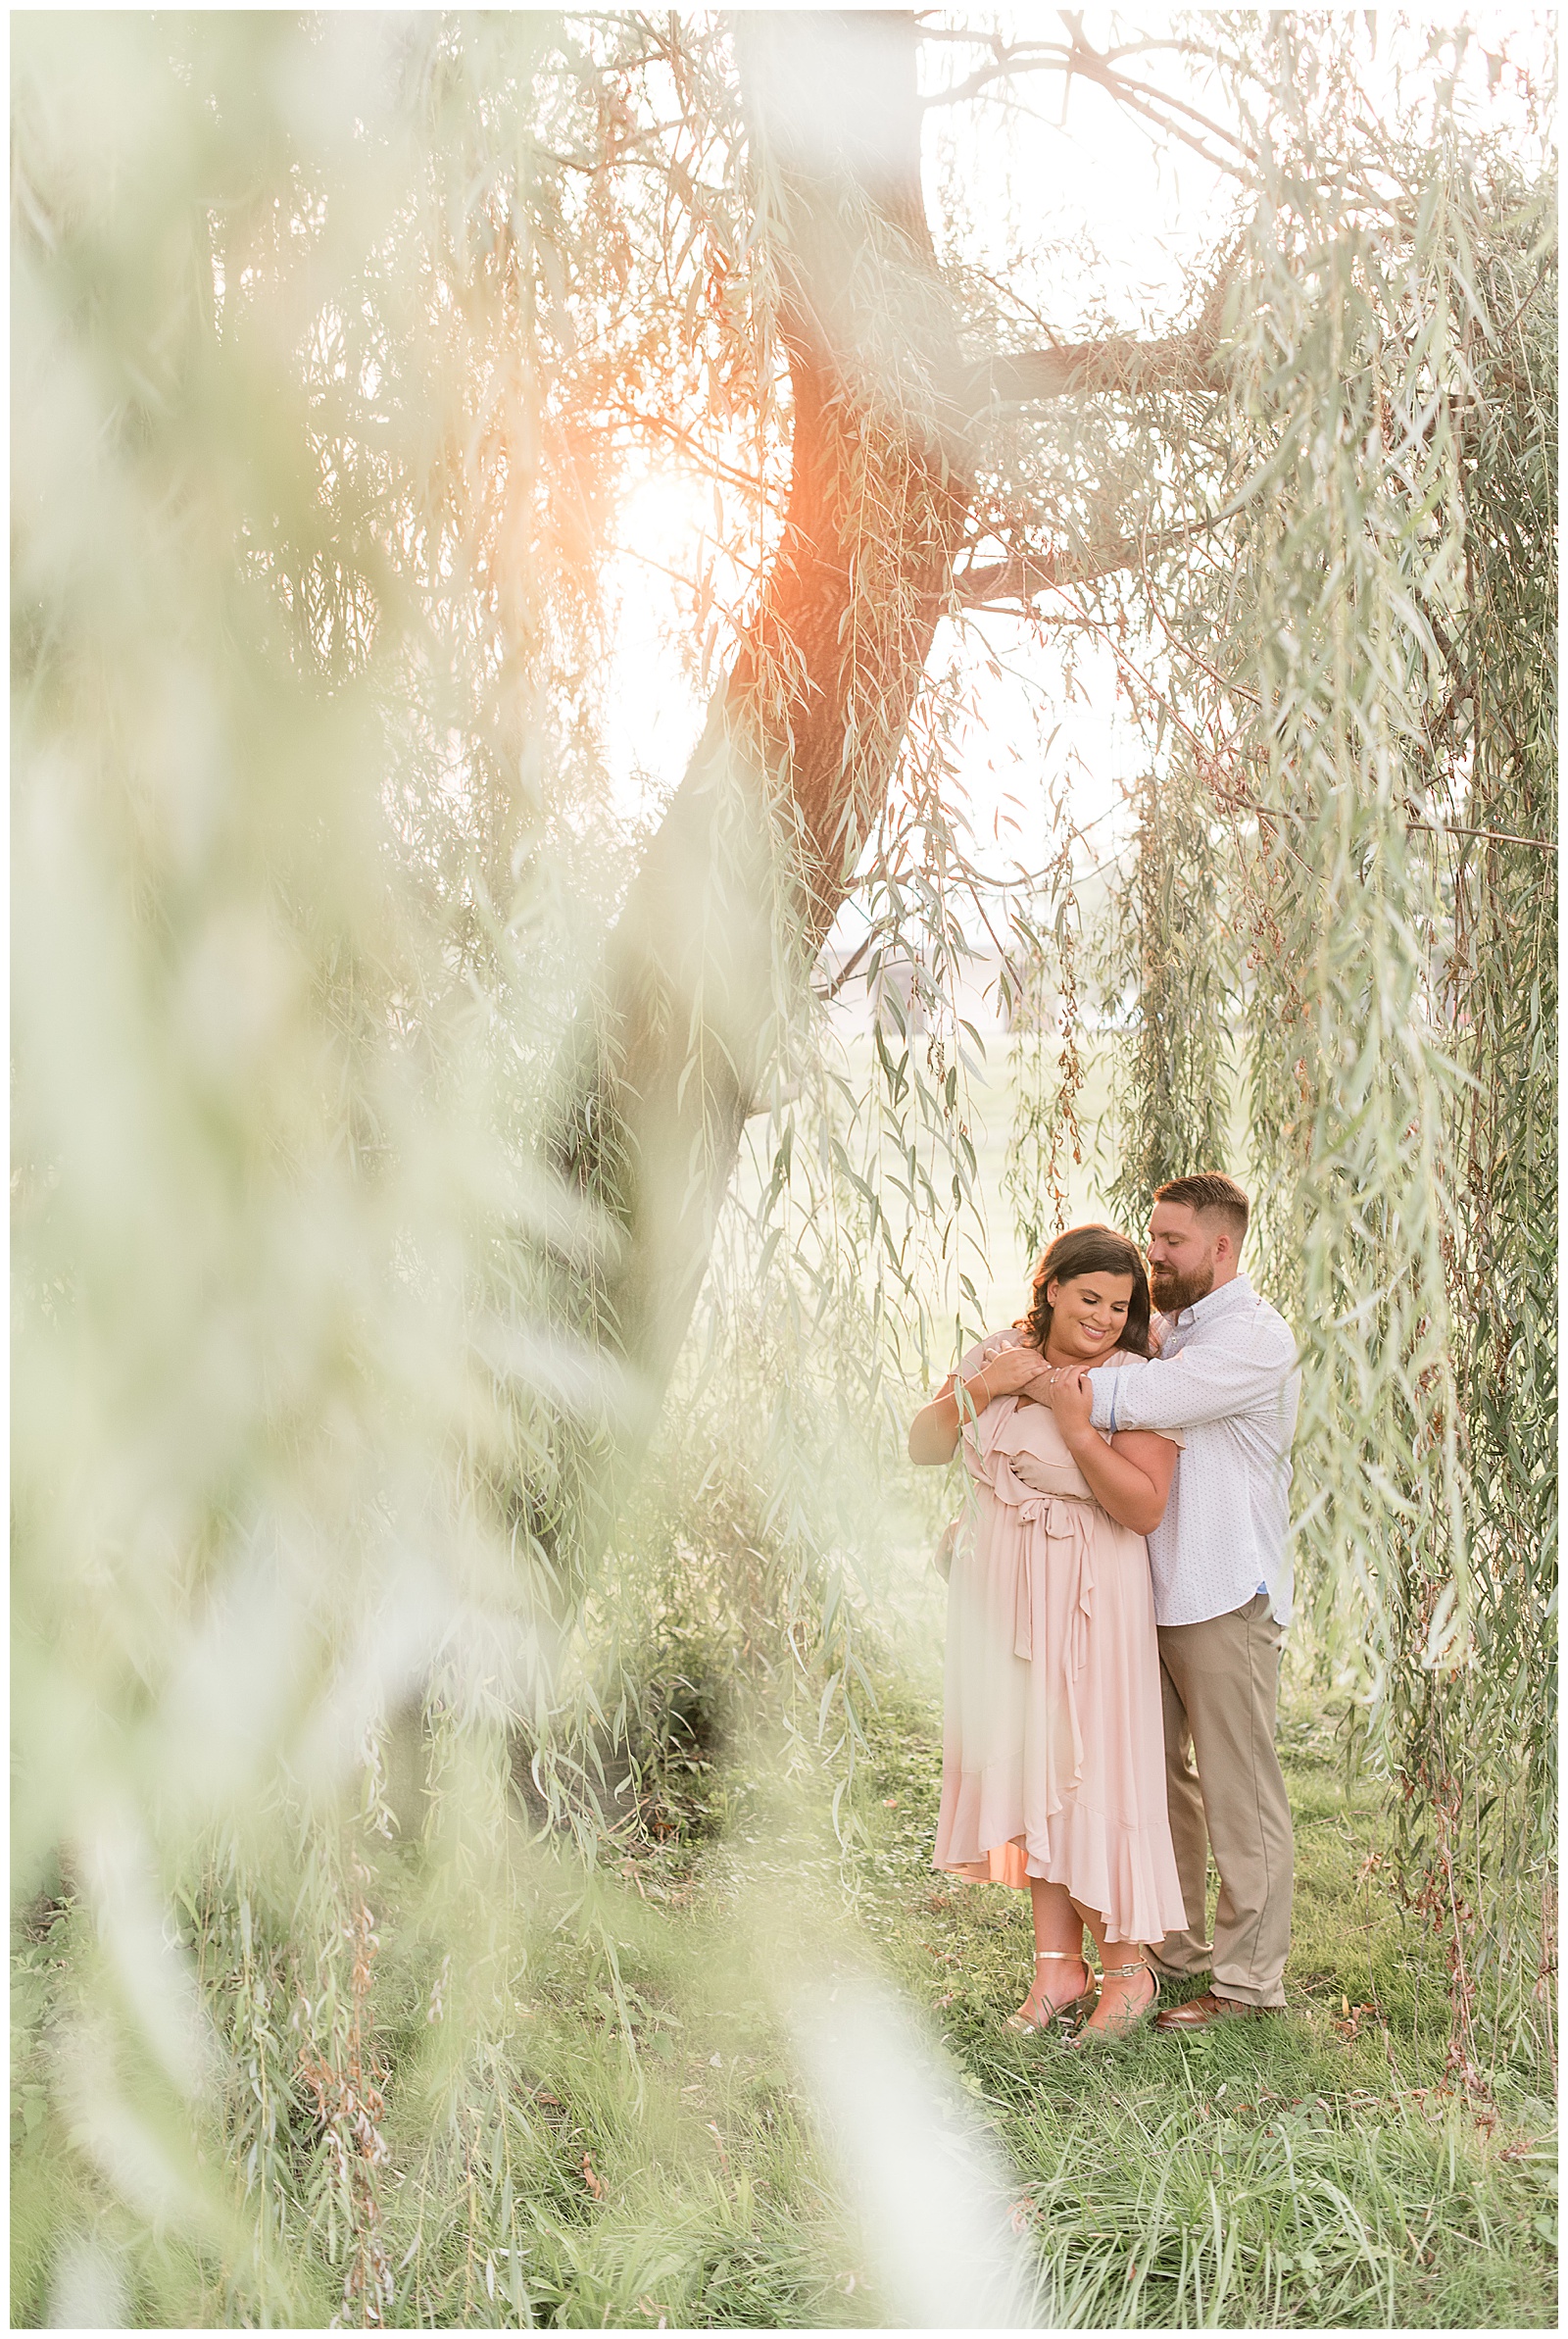 guy hugging girl from behind as she looks down and standing under large willow tree and sun shining in lancaster pennsylvania